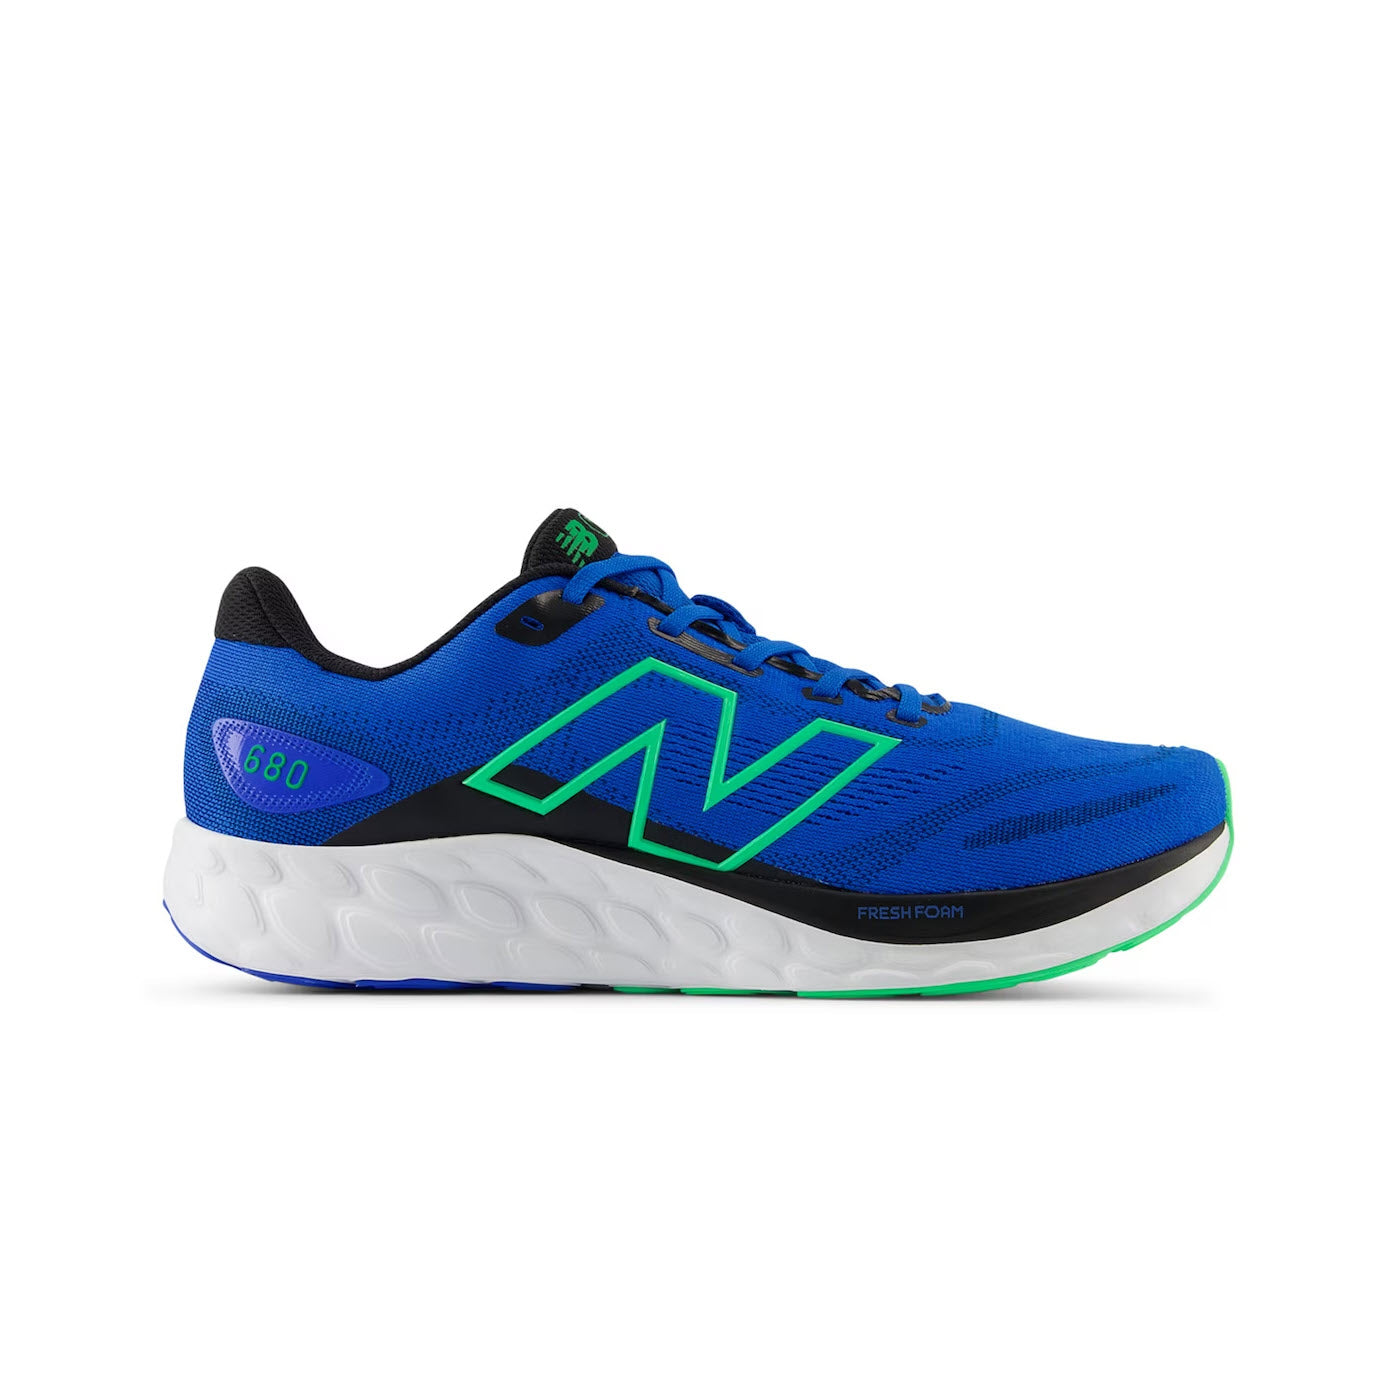 A blue New Balance 680v8 running shoe with a large green "n" logo on the side, white soles, and labeled with "680" near the heel.